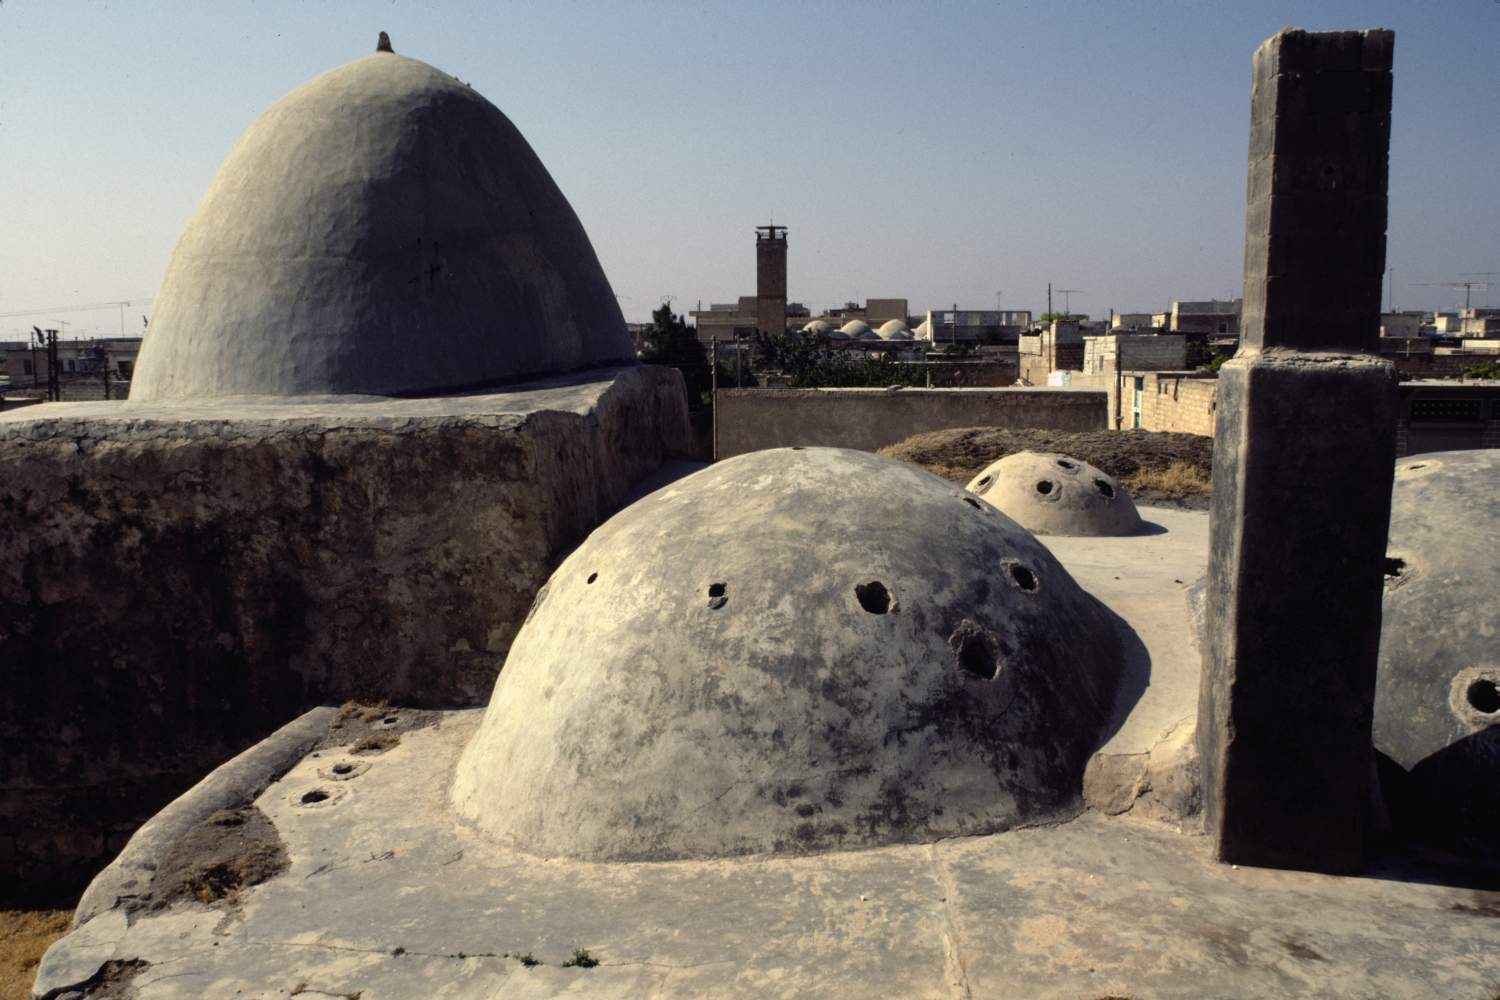 View of domes. Minaret of Great Mosque visible in background.